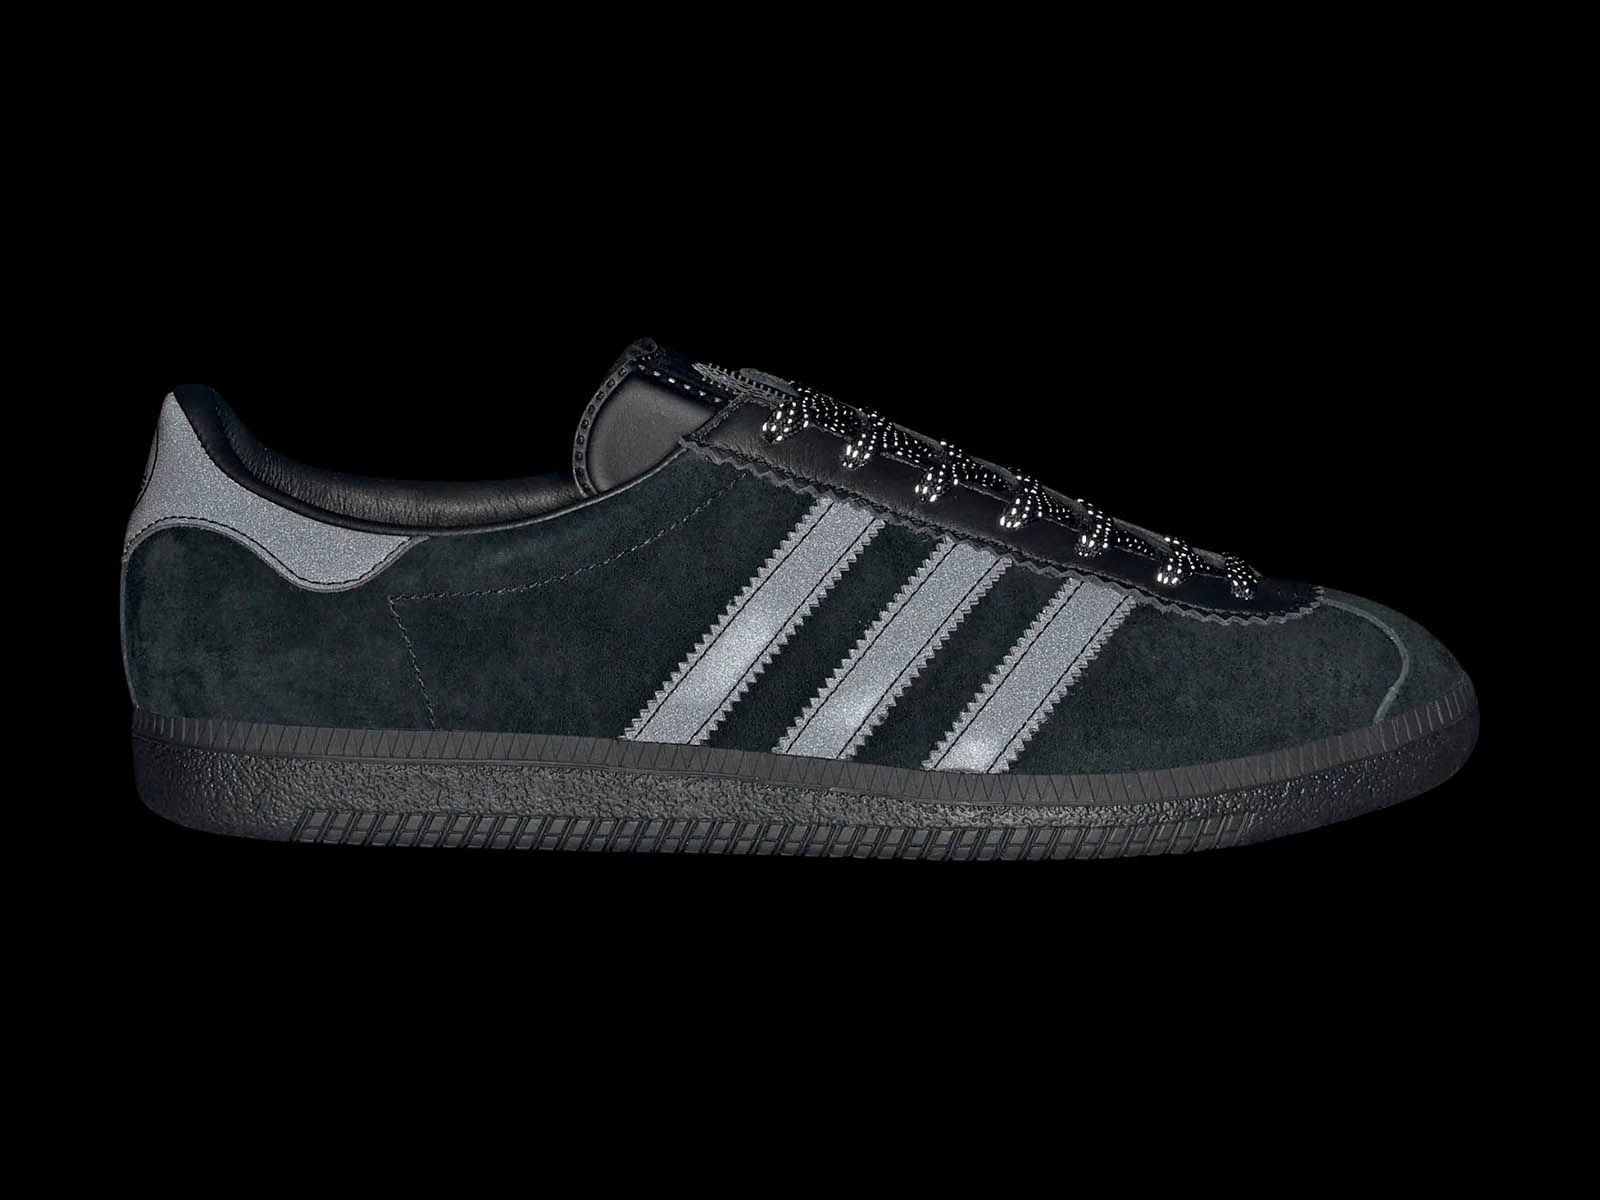 Introducing adidas by Joy Division and Peter Saville